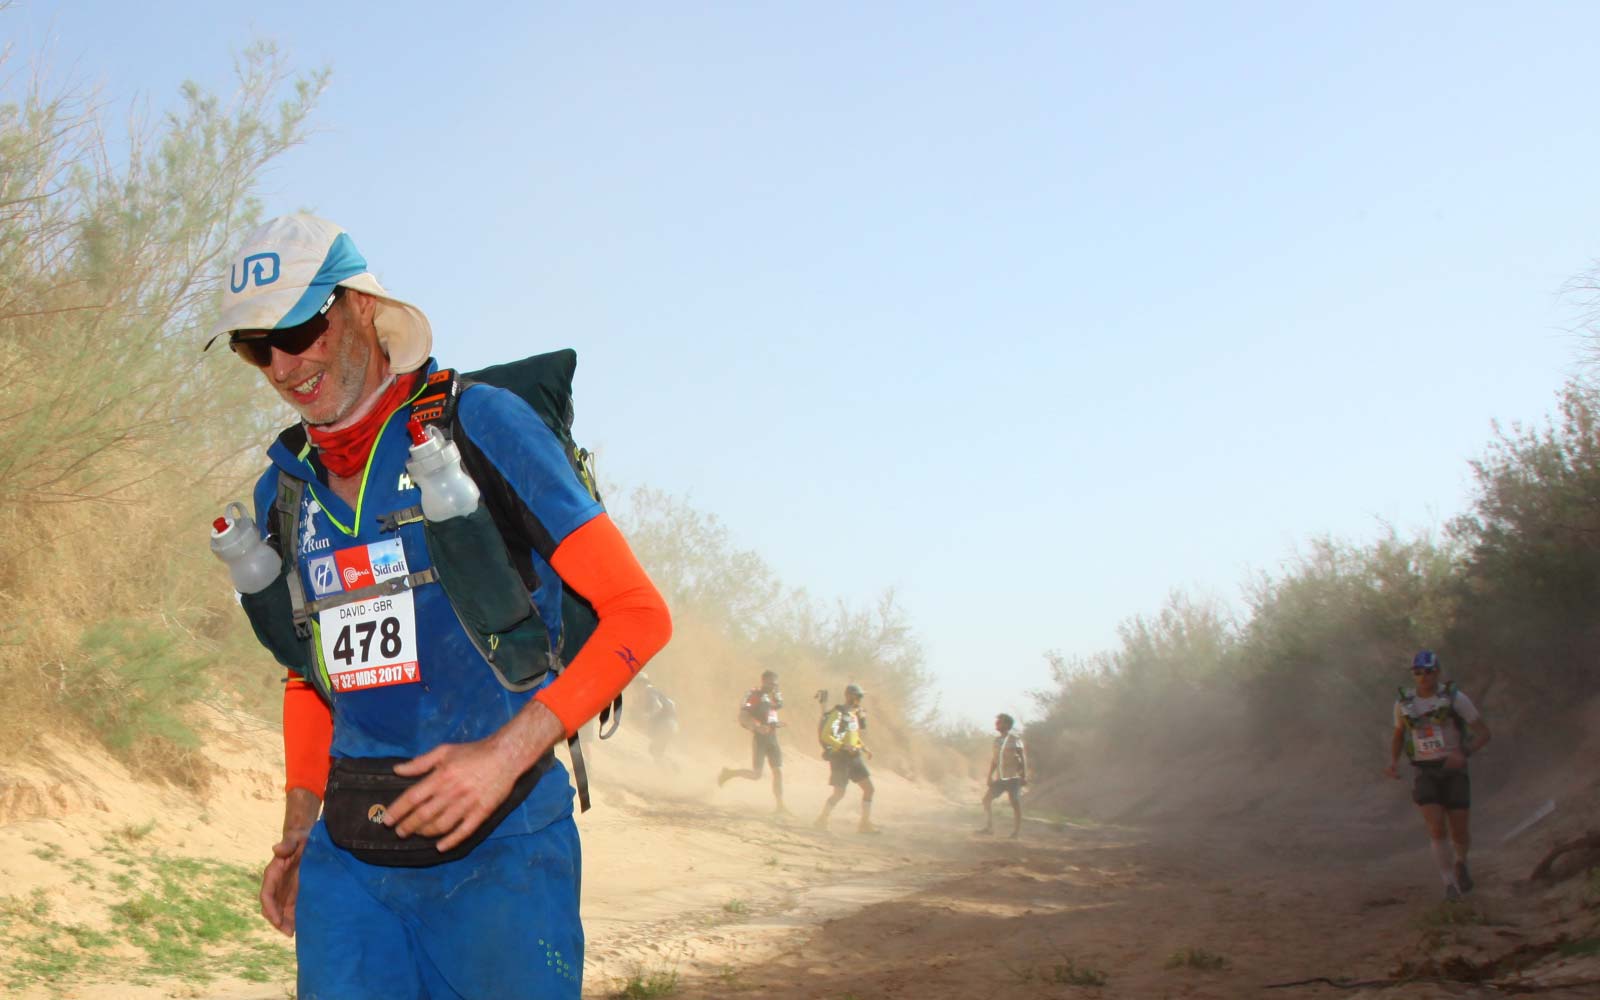 Ultra runner Dave Wise competes at the Marathon Des Sables